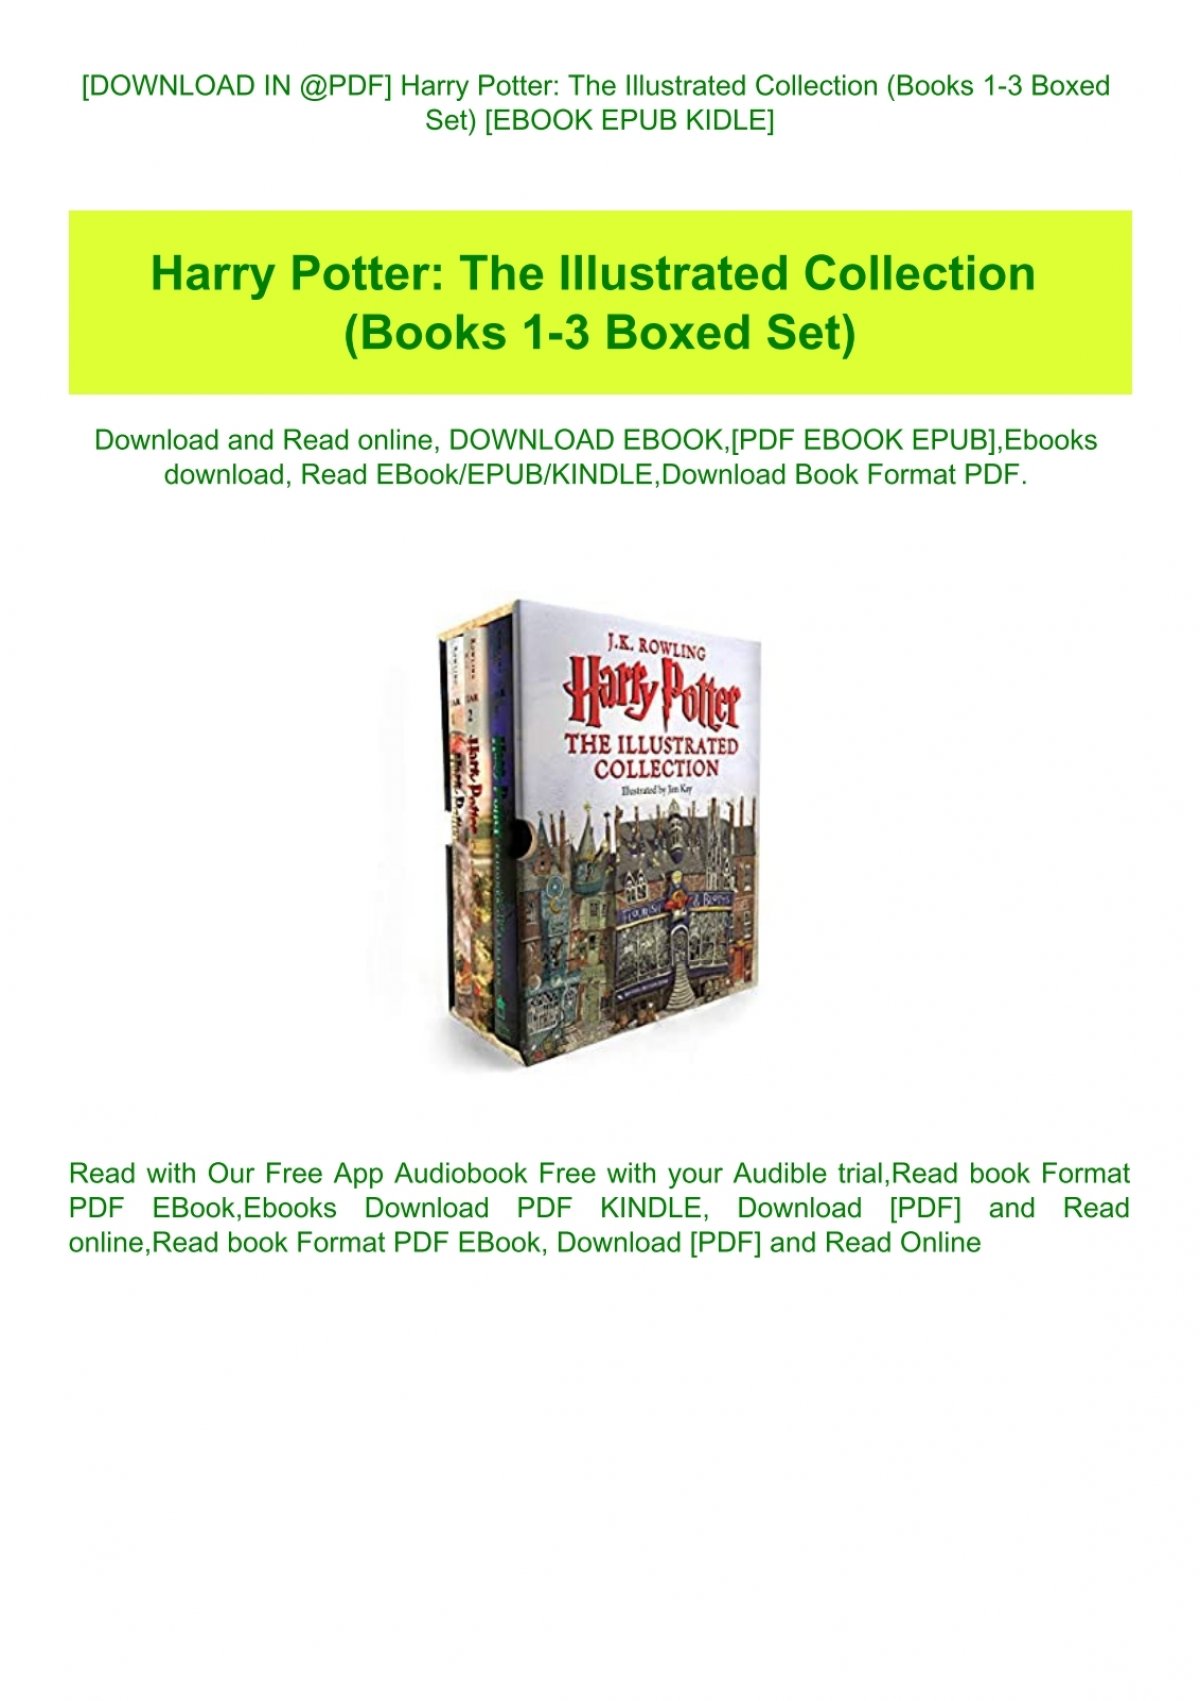 harry potter illustrated book 1 download